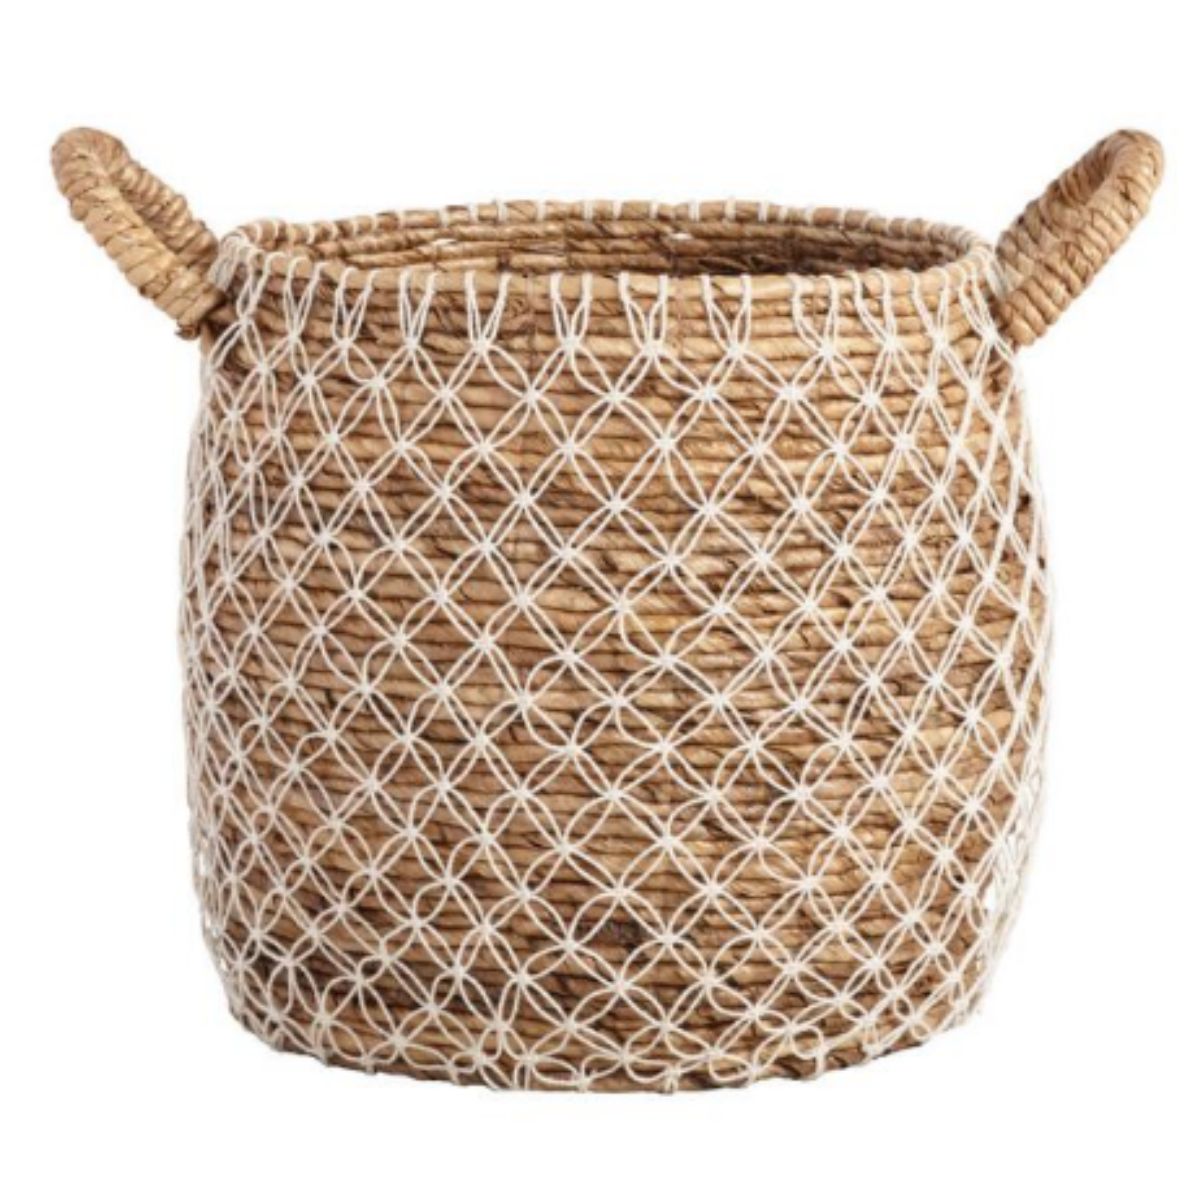 A charming Bianca Macrame Seagrass Tote Basket  with handles to buy from World Market